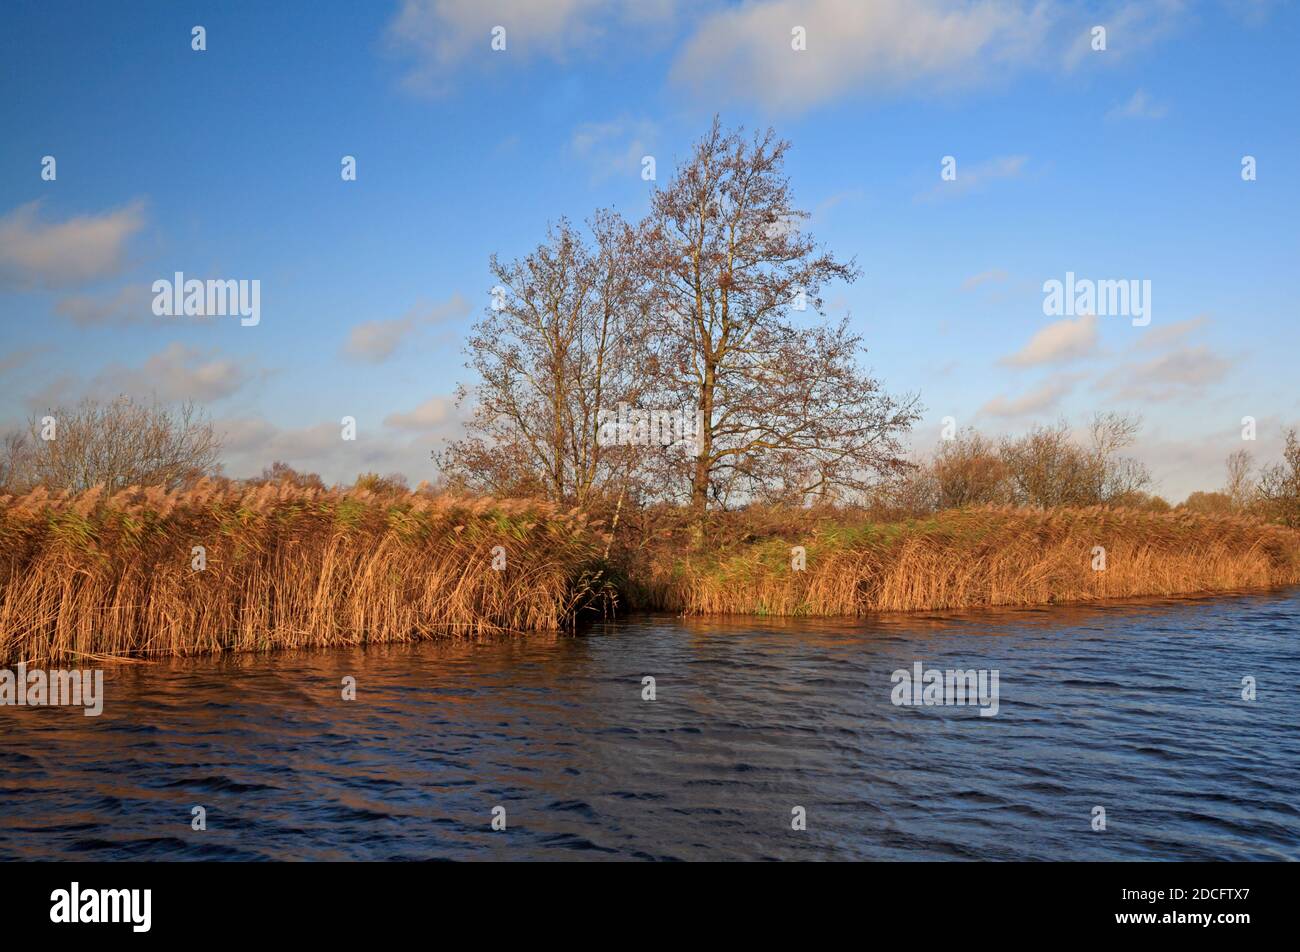 A view of the reed fringed banks of the River Ant in autumn on the Norfolk Broads at Ludham, Norfolk, England, United Kingdom. Stock Photo